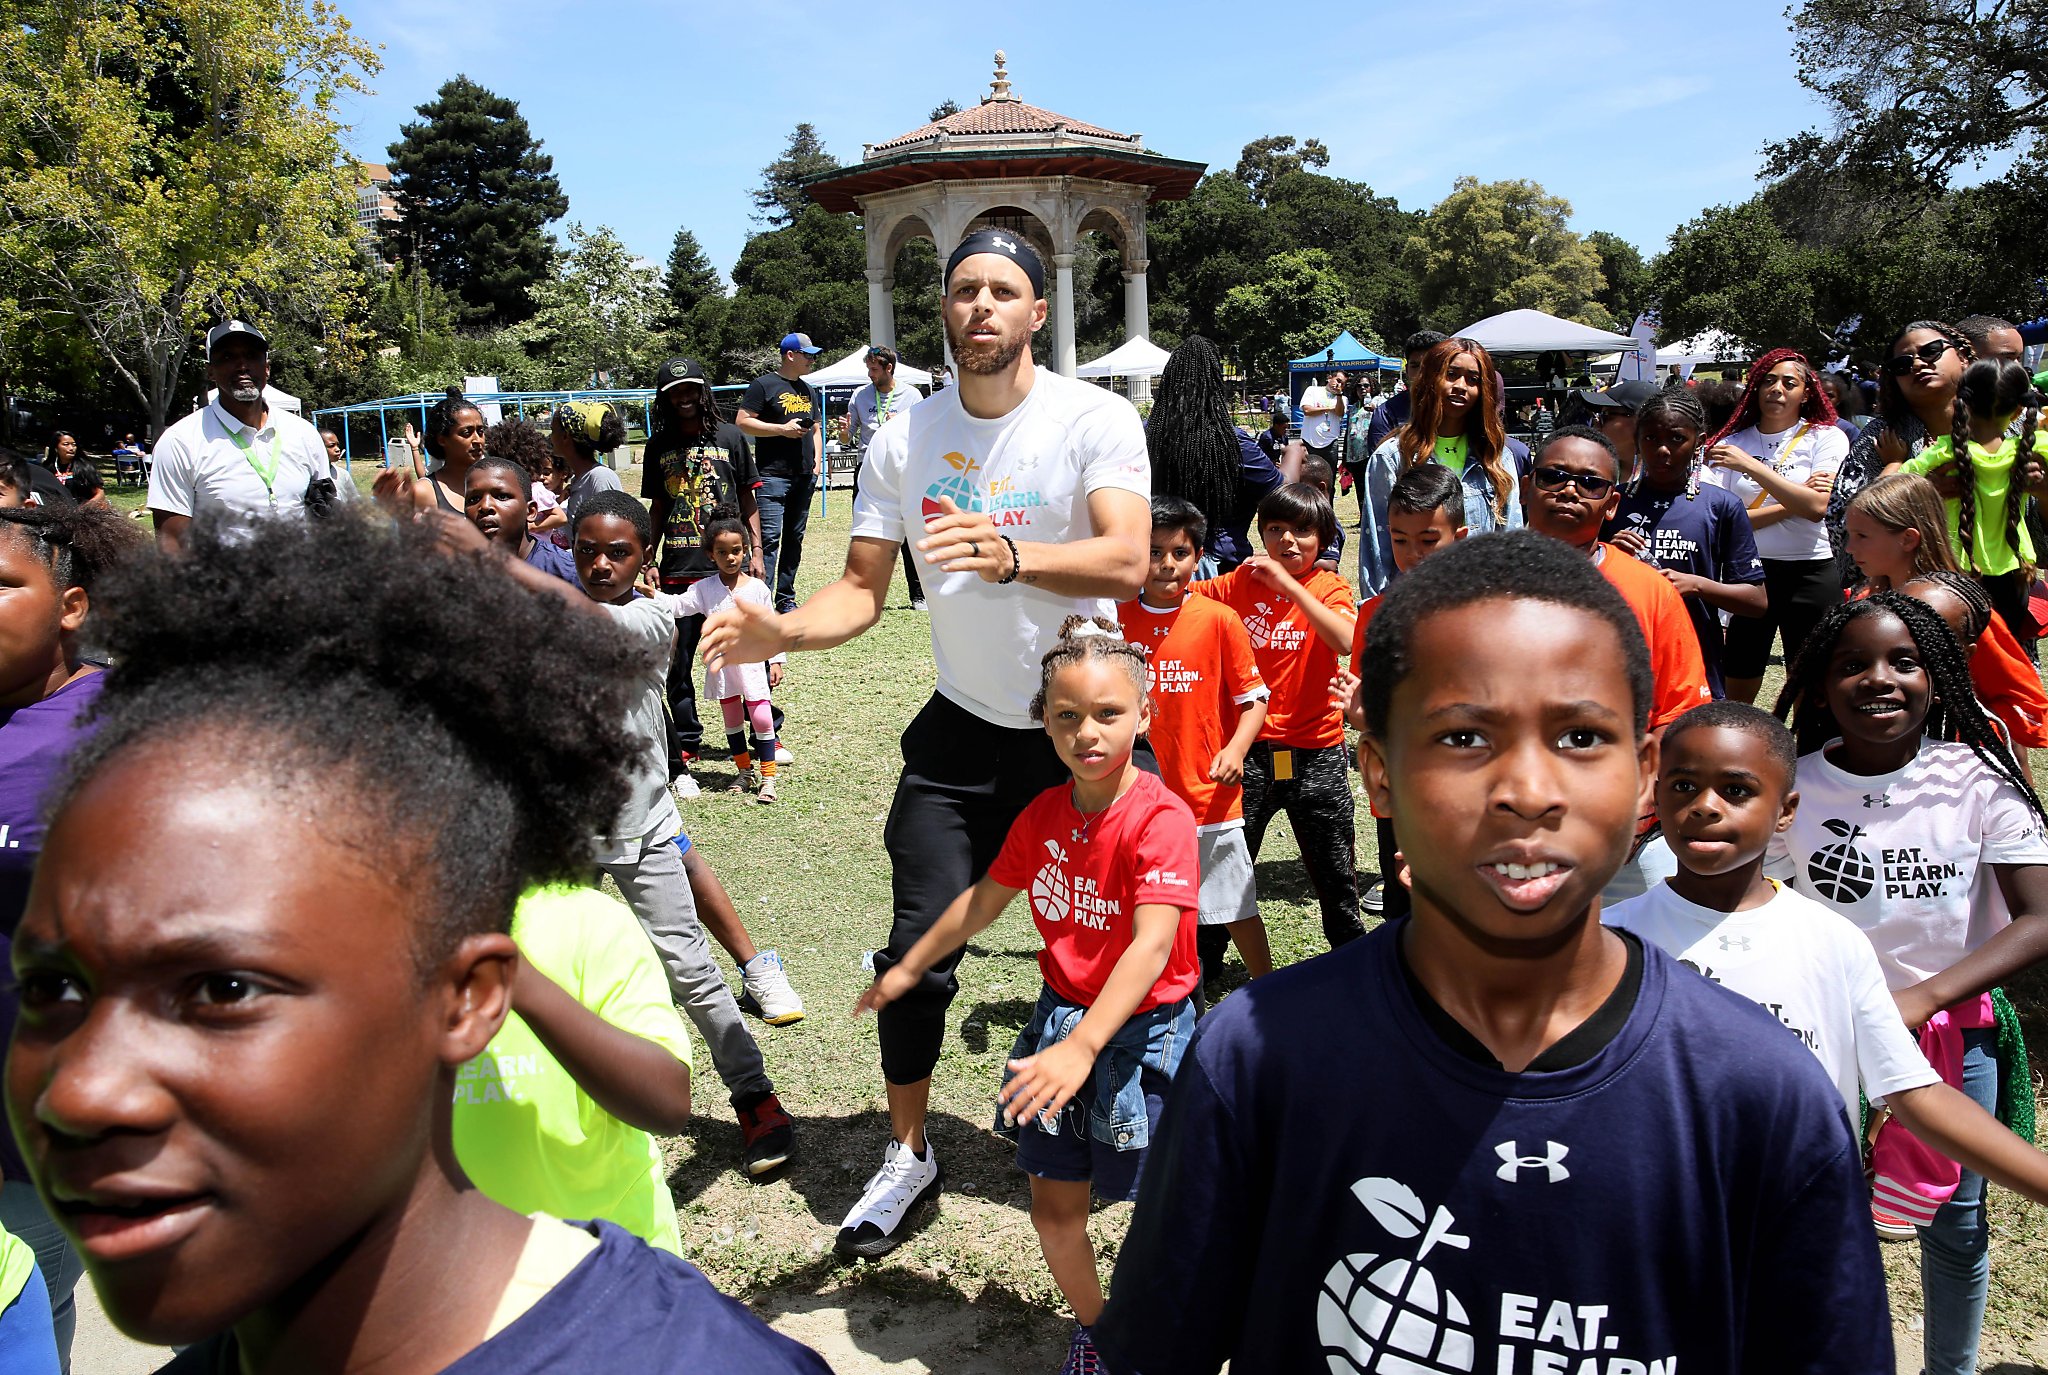 Steph Curry and Ayesha Curry on Philanthropy and The Eat Play